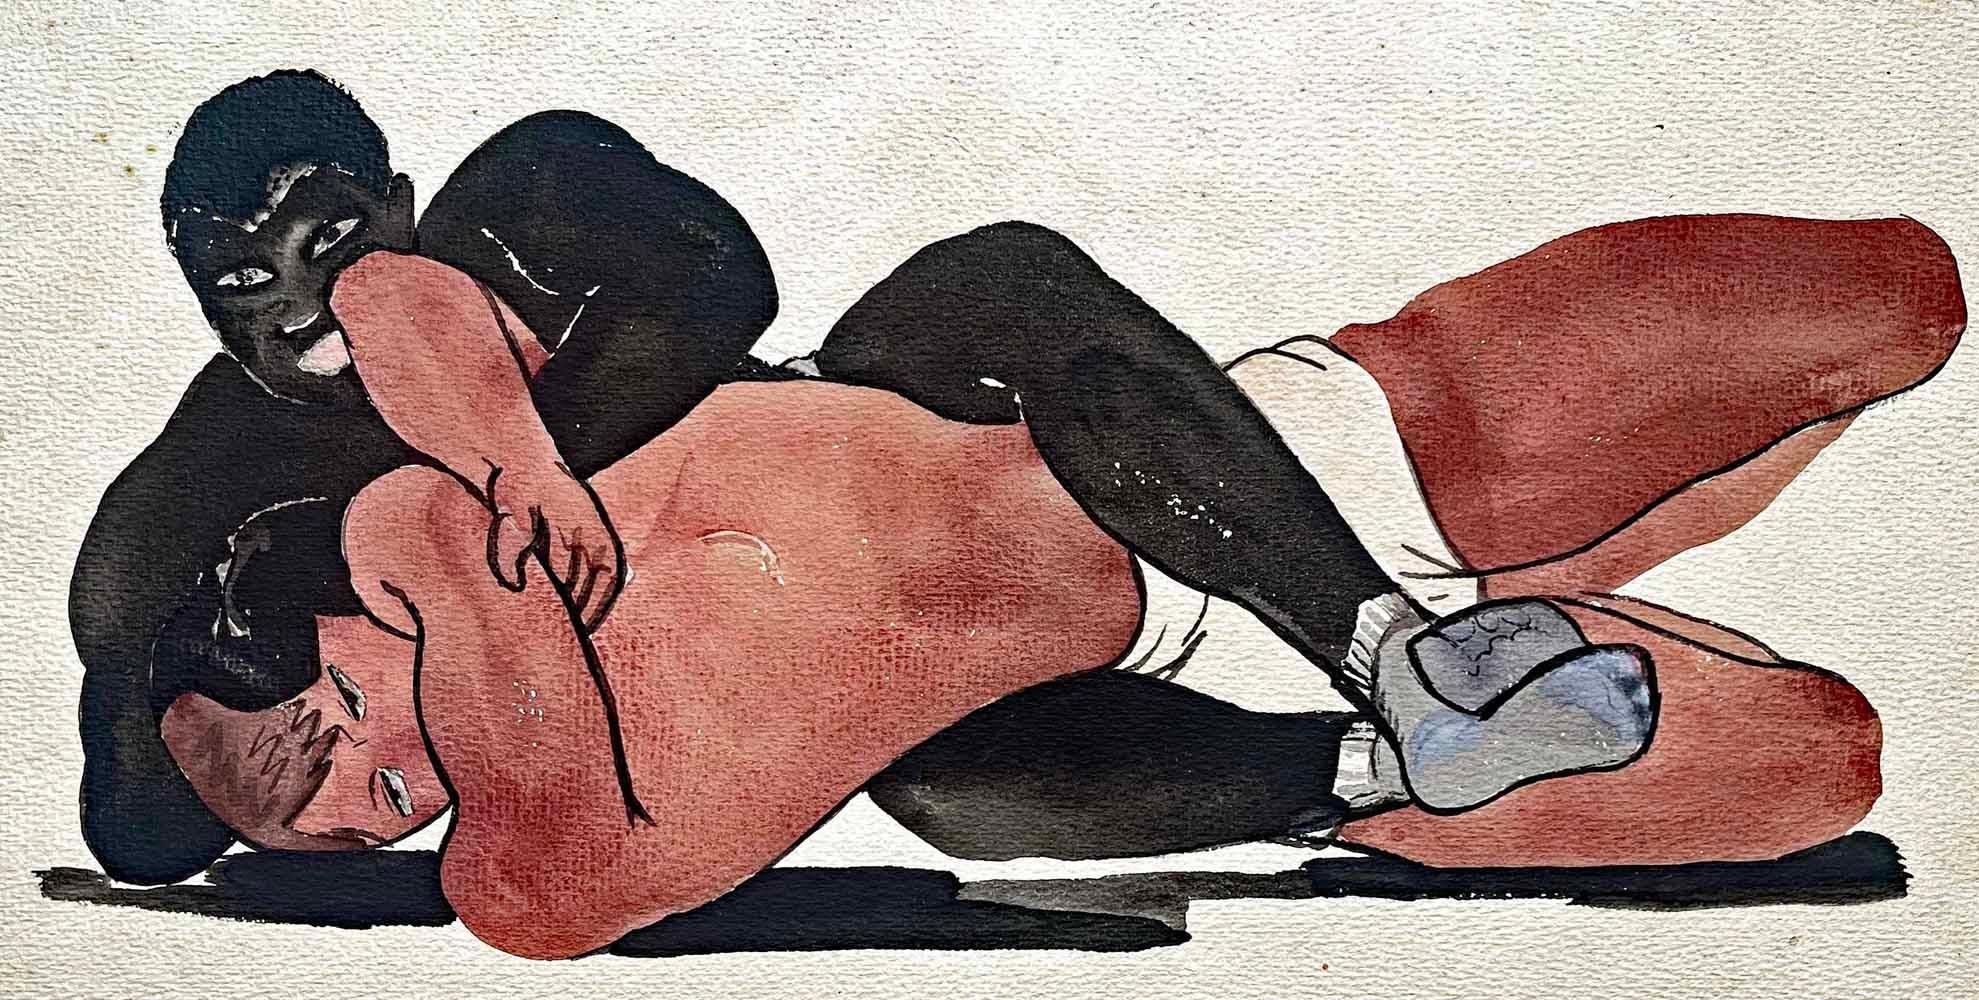 One of a small series of paintings by William L'Engle dating to the late 1920s, this striking watercolor depicts a pair of wrestlers -- one Black and one lighter-skinned -- in the throes of a match, with one gripping the other in a scissors hold